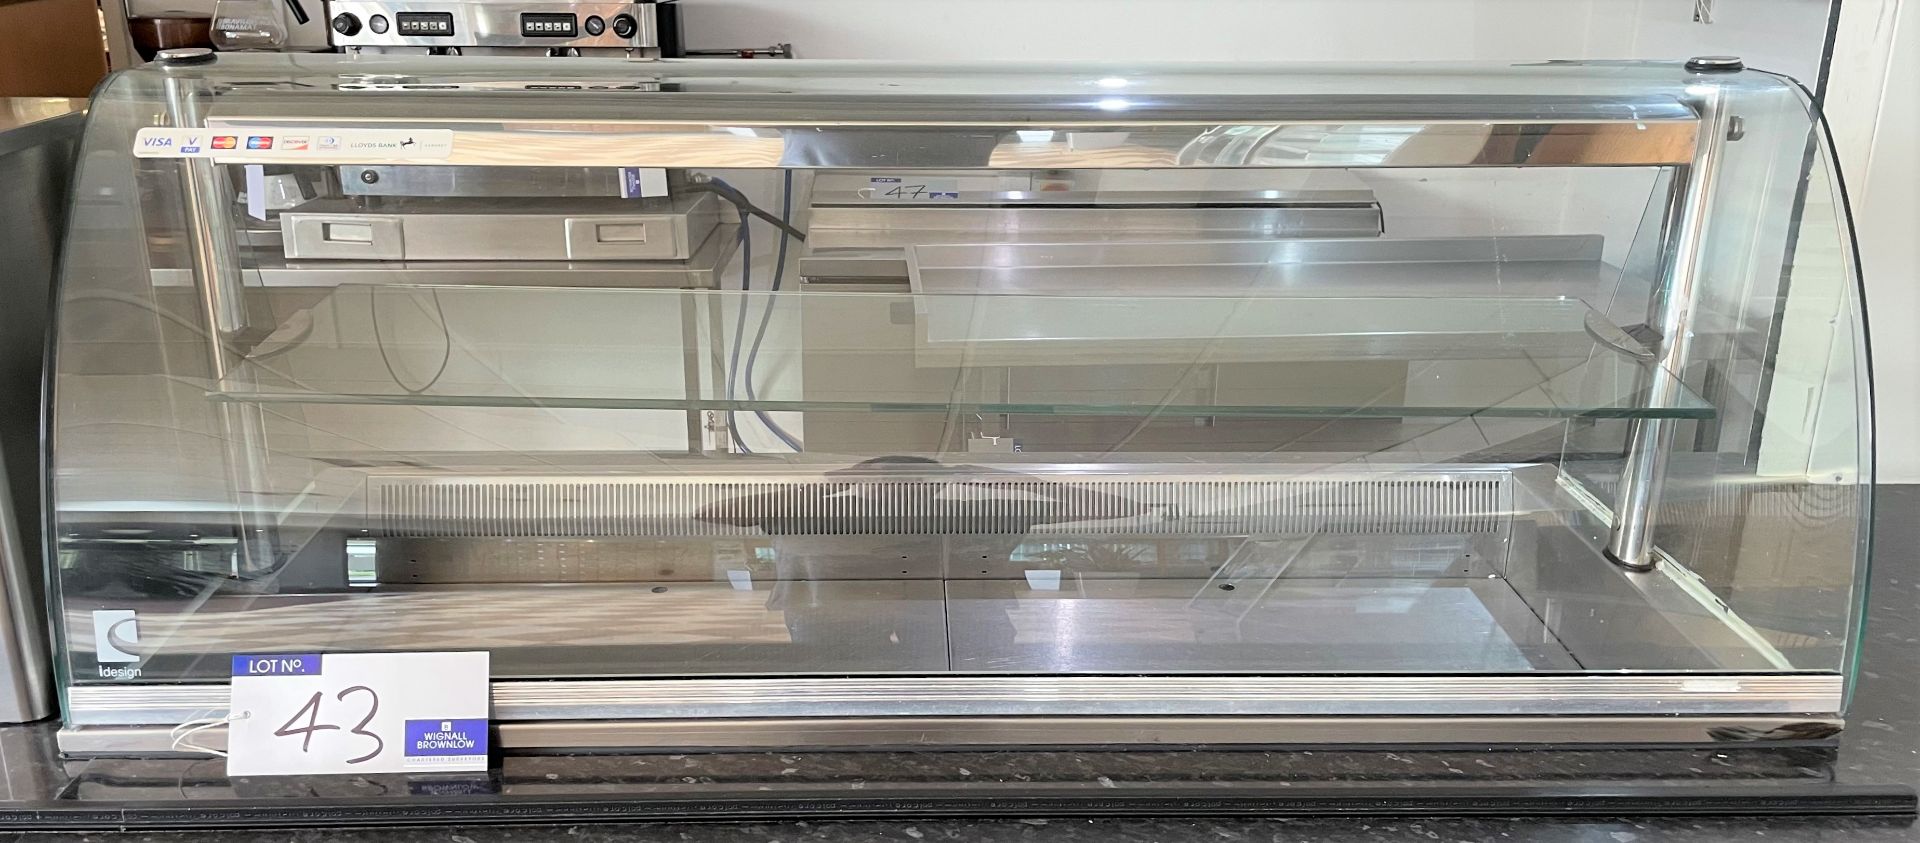 An Integra idesign Refrigerated Food Display Unit with Hygiene Screen, Glass Shelf and Lighting-in